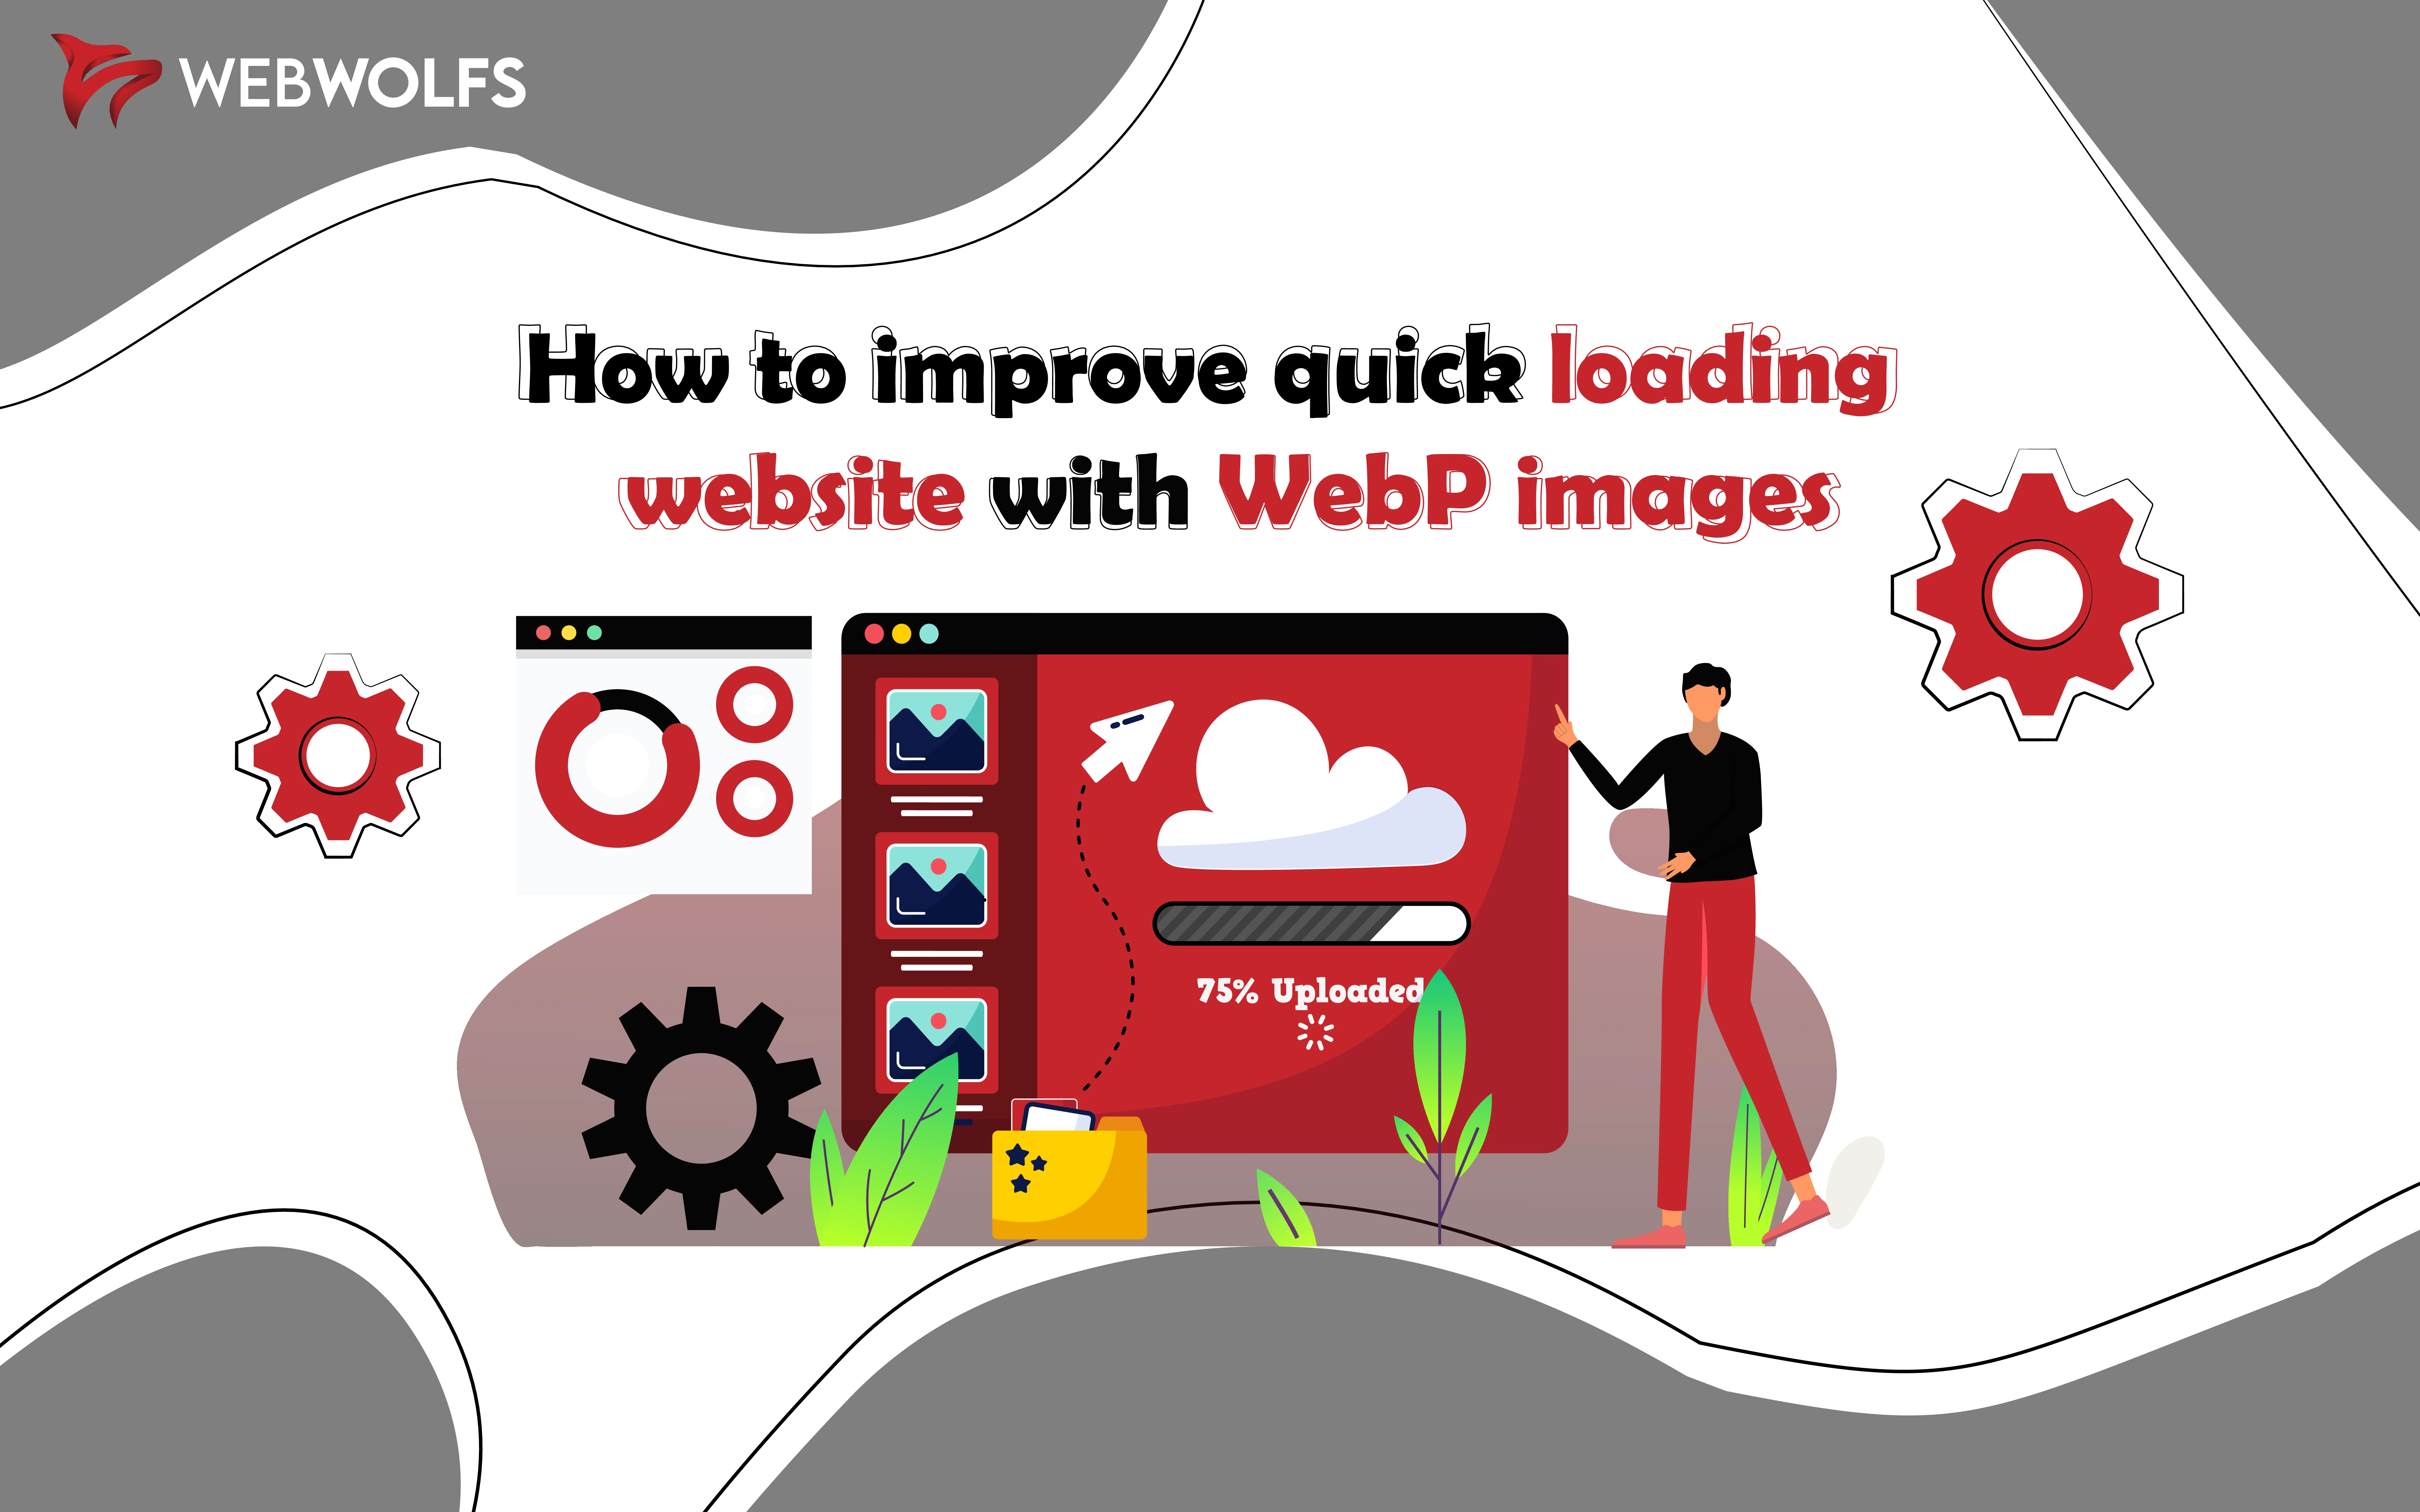 How to improve quick loading website with WebP images